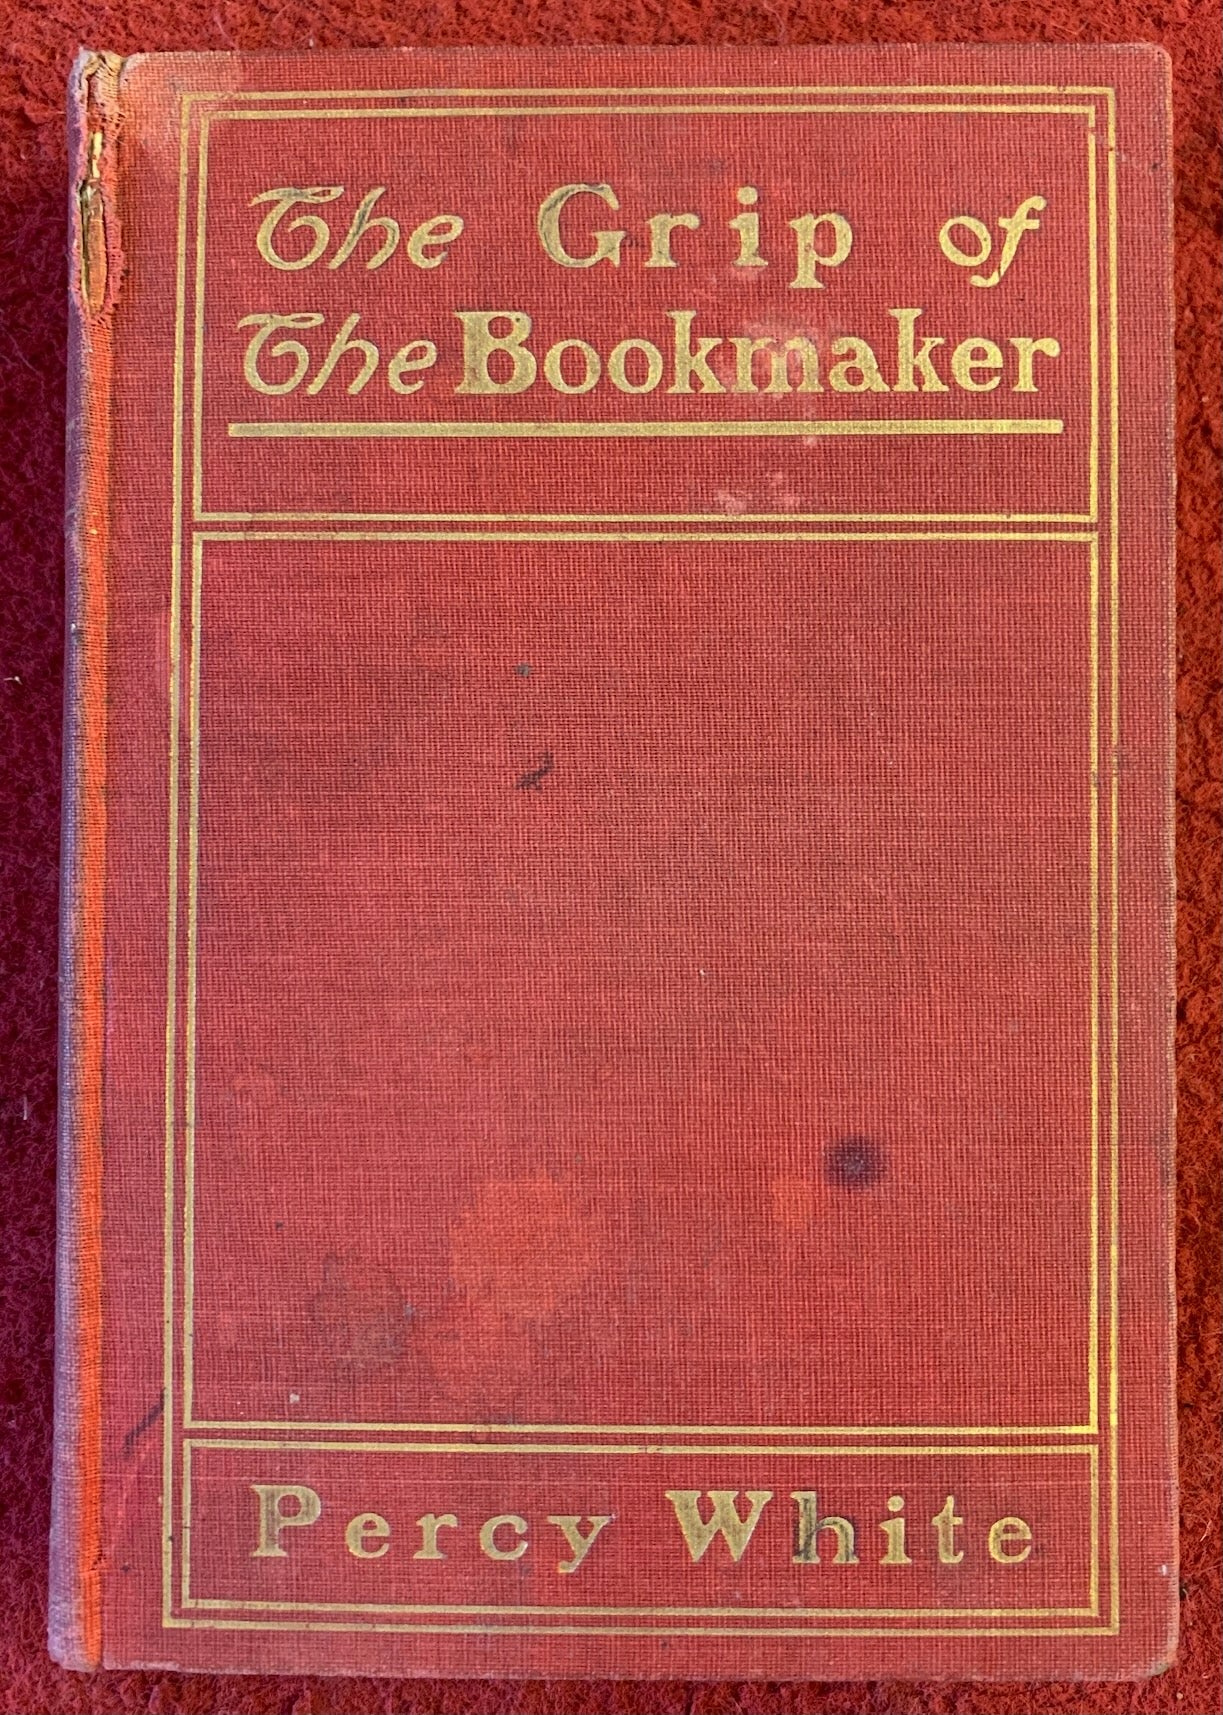 The Grip Of The Bookmaker, Percy White, 1901, R. F. Fenno First U. S. Hardcover Edition